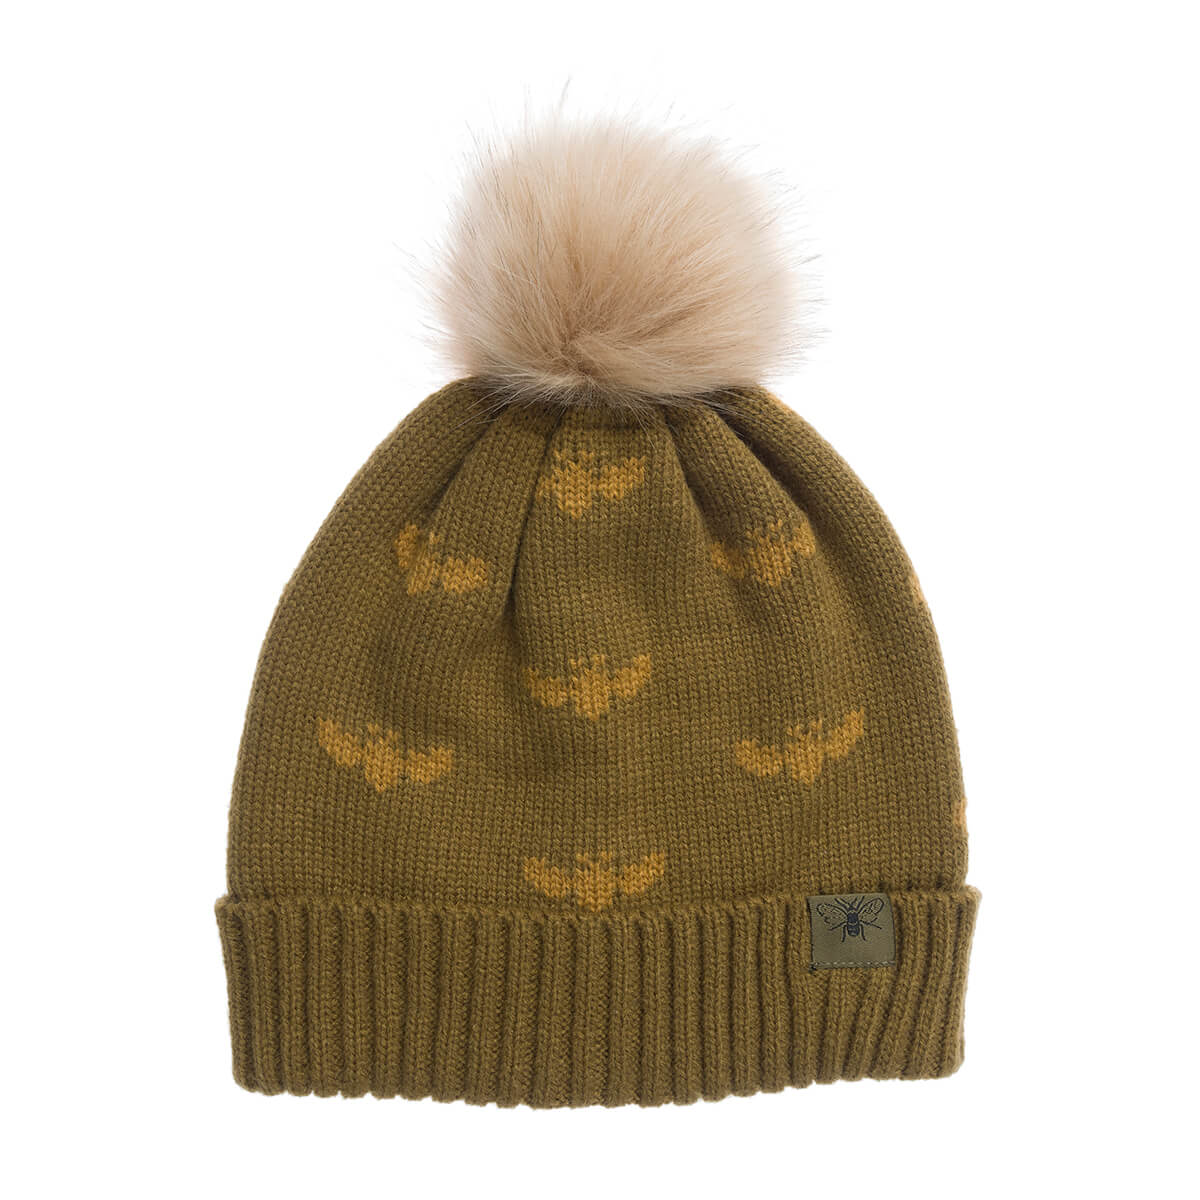 Bees Knitted Hat